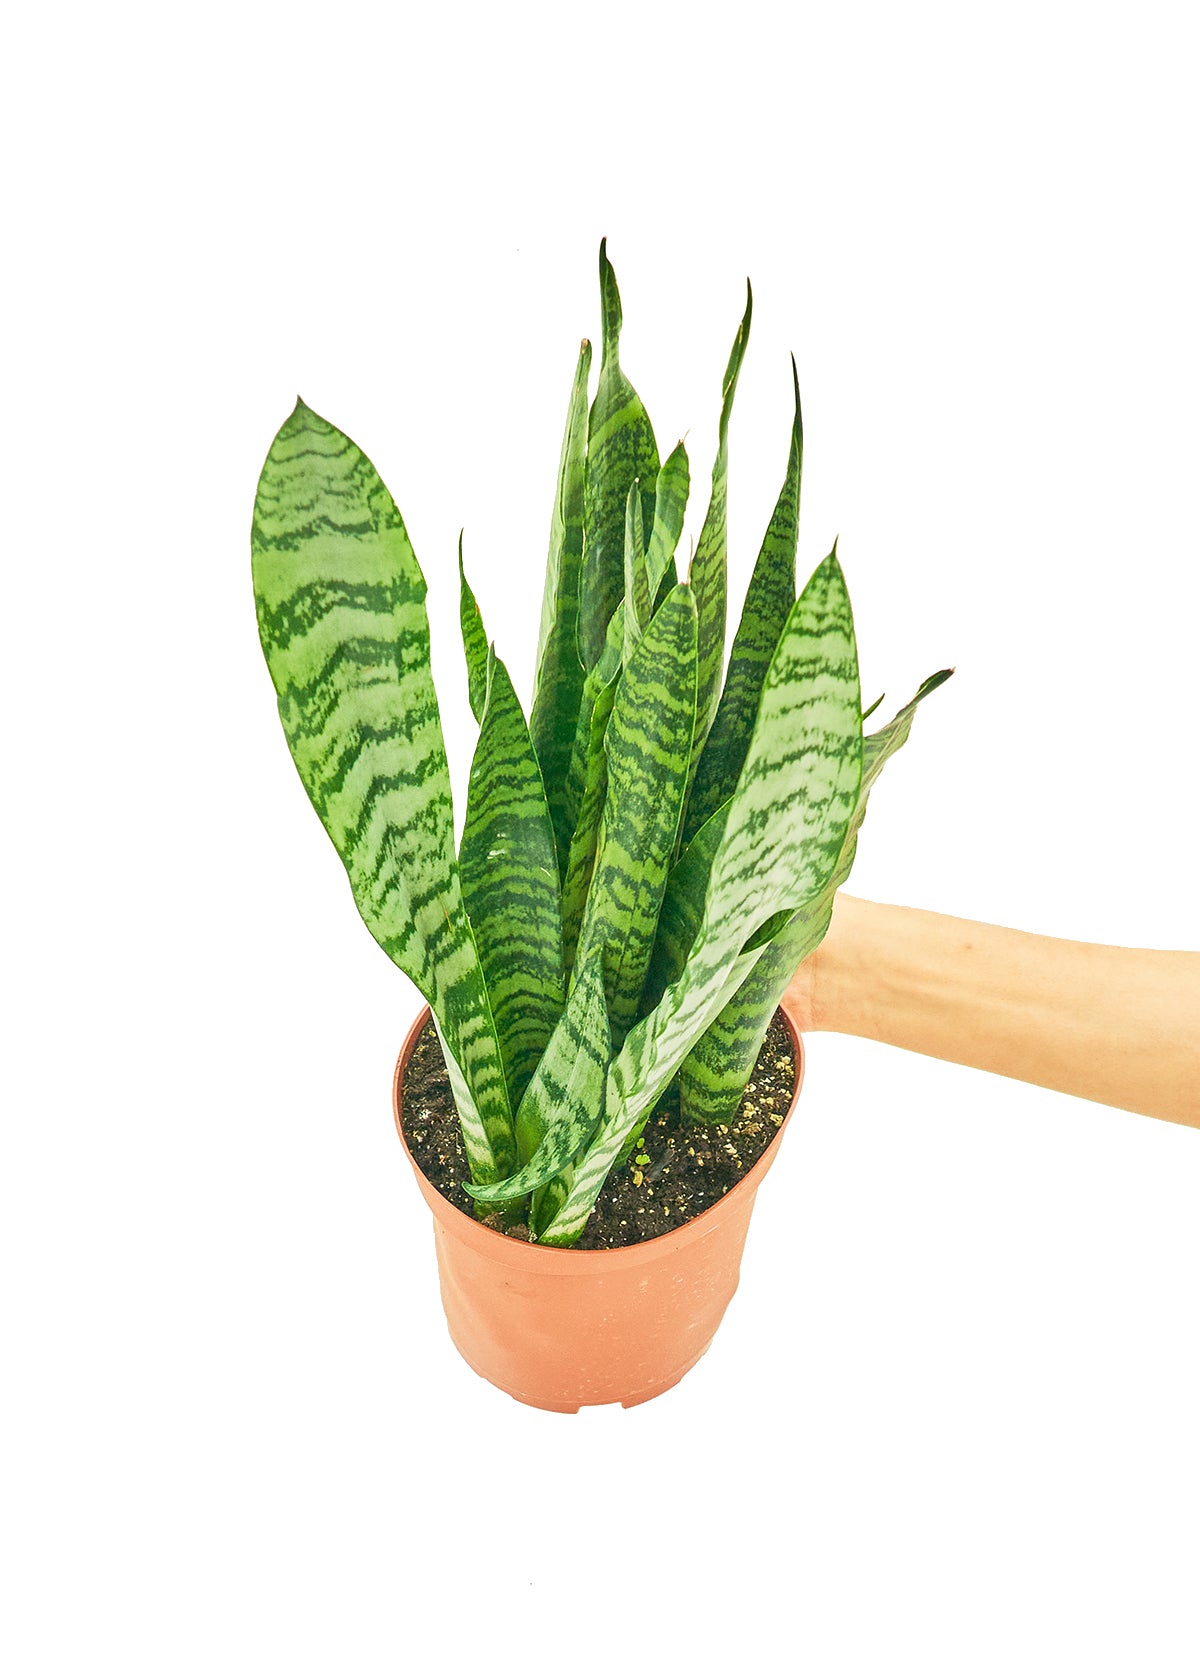 Medium size Zeylanica Snake Plant in a growers pot with a white background and a hand holding the pot to show the top view